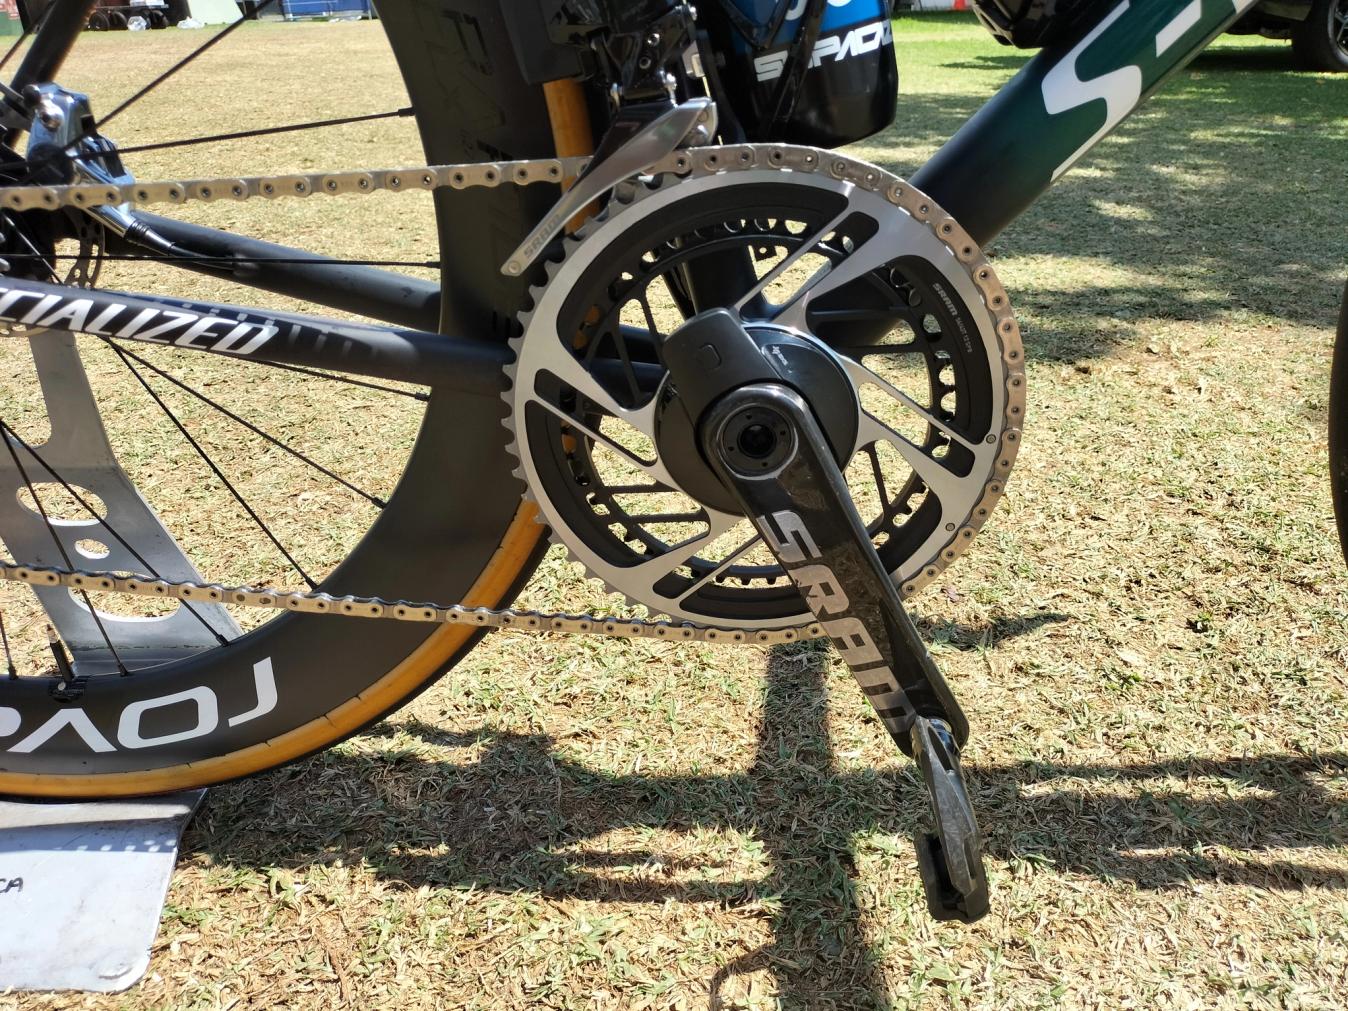 Bora-Hansgrohe is one of the rare teams that doesn't use Shimano groupsets